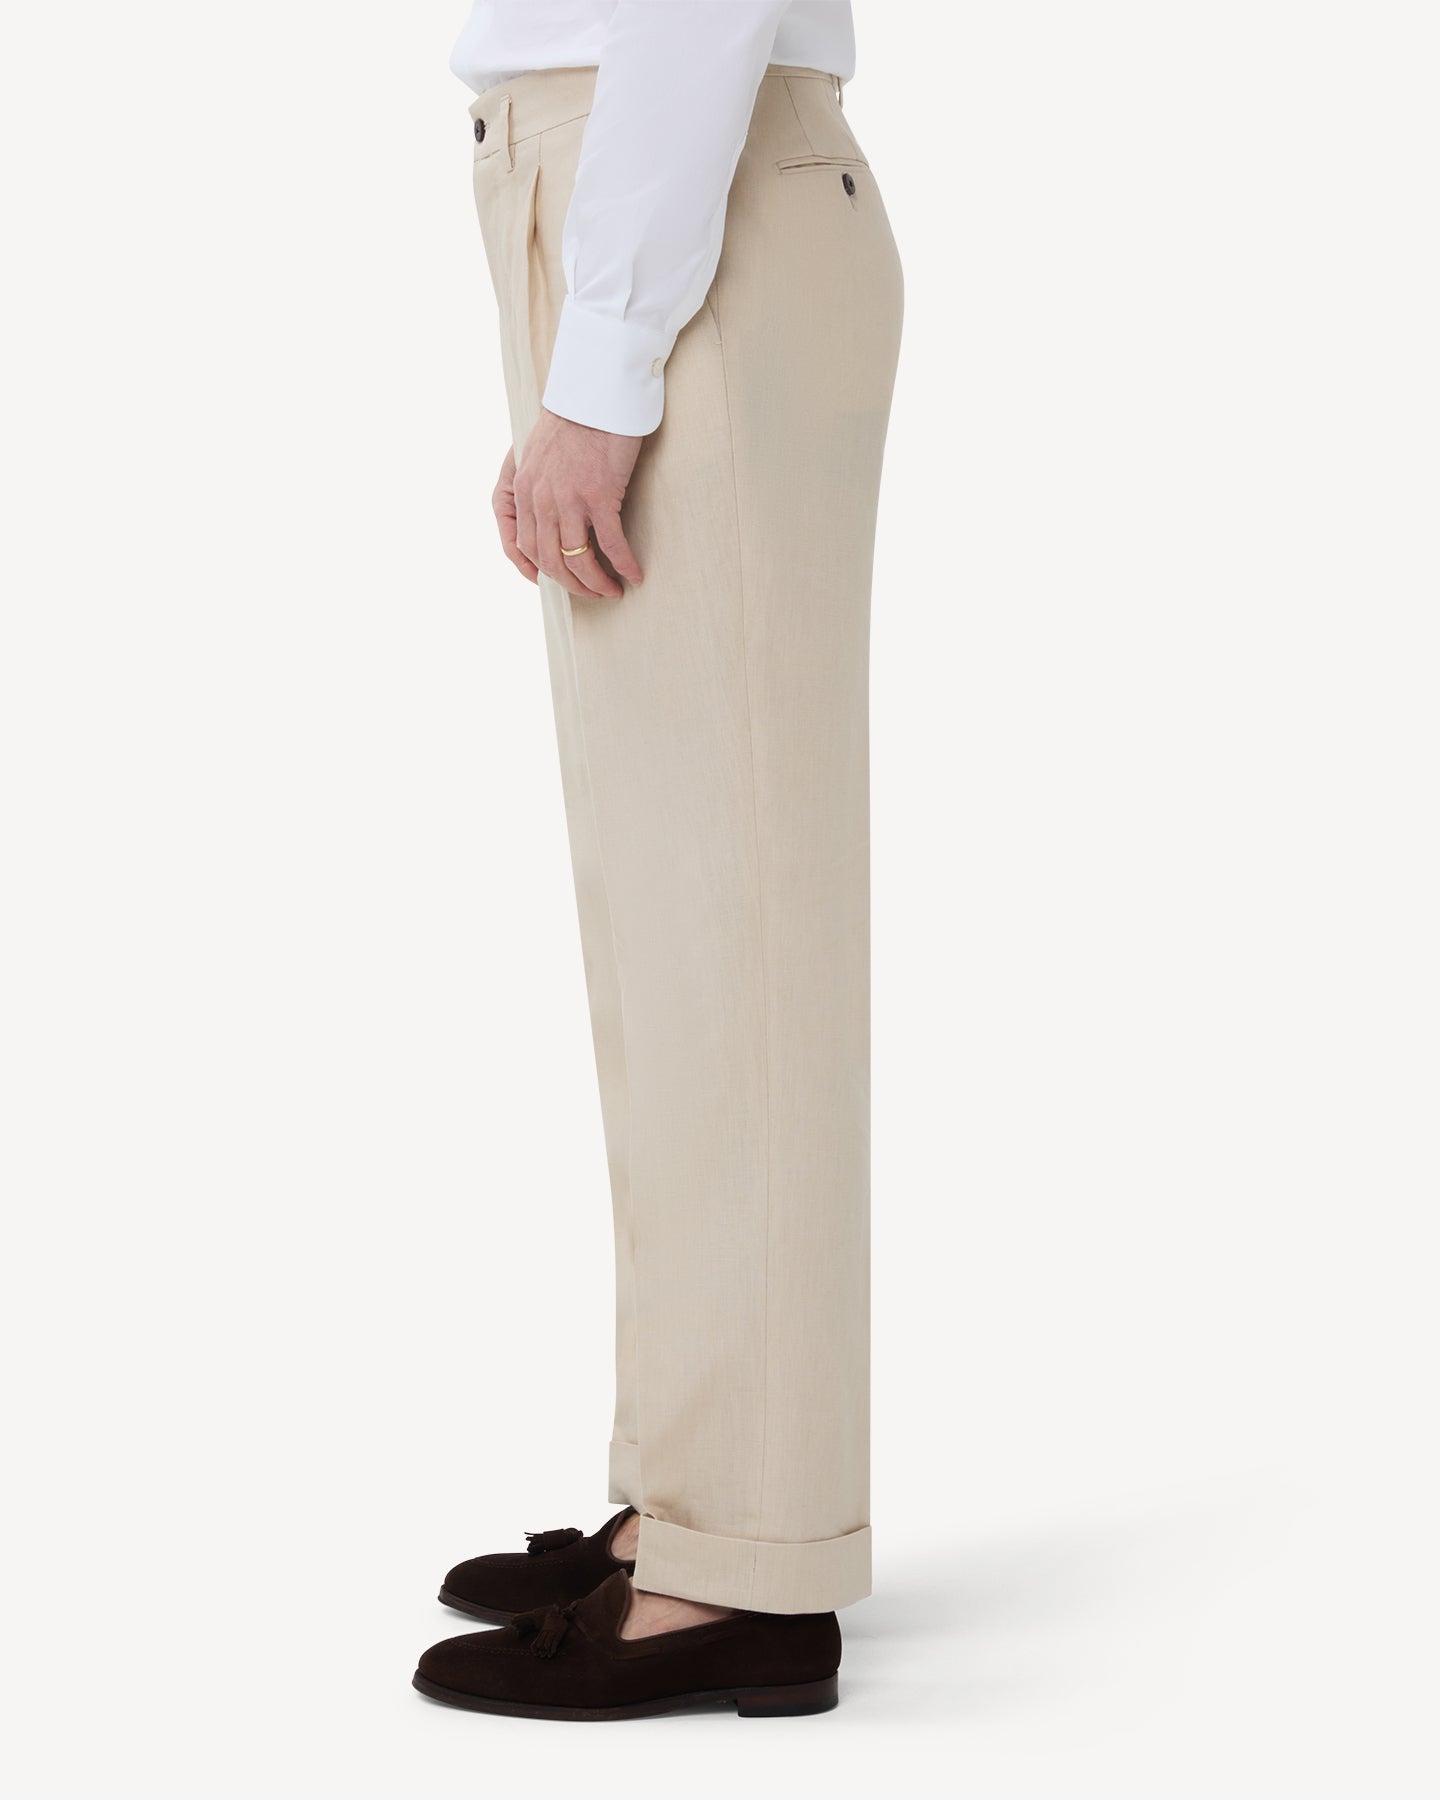 The side of stone linen trousers with double pleats and belt loops